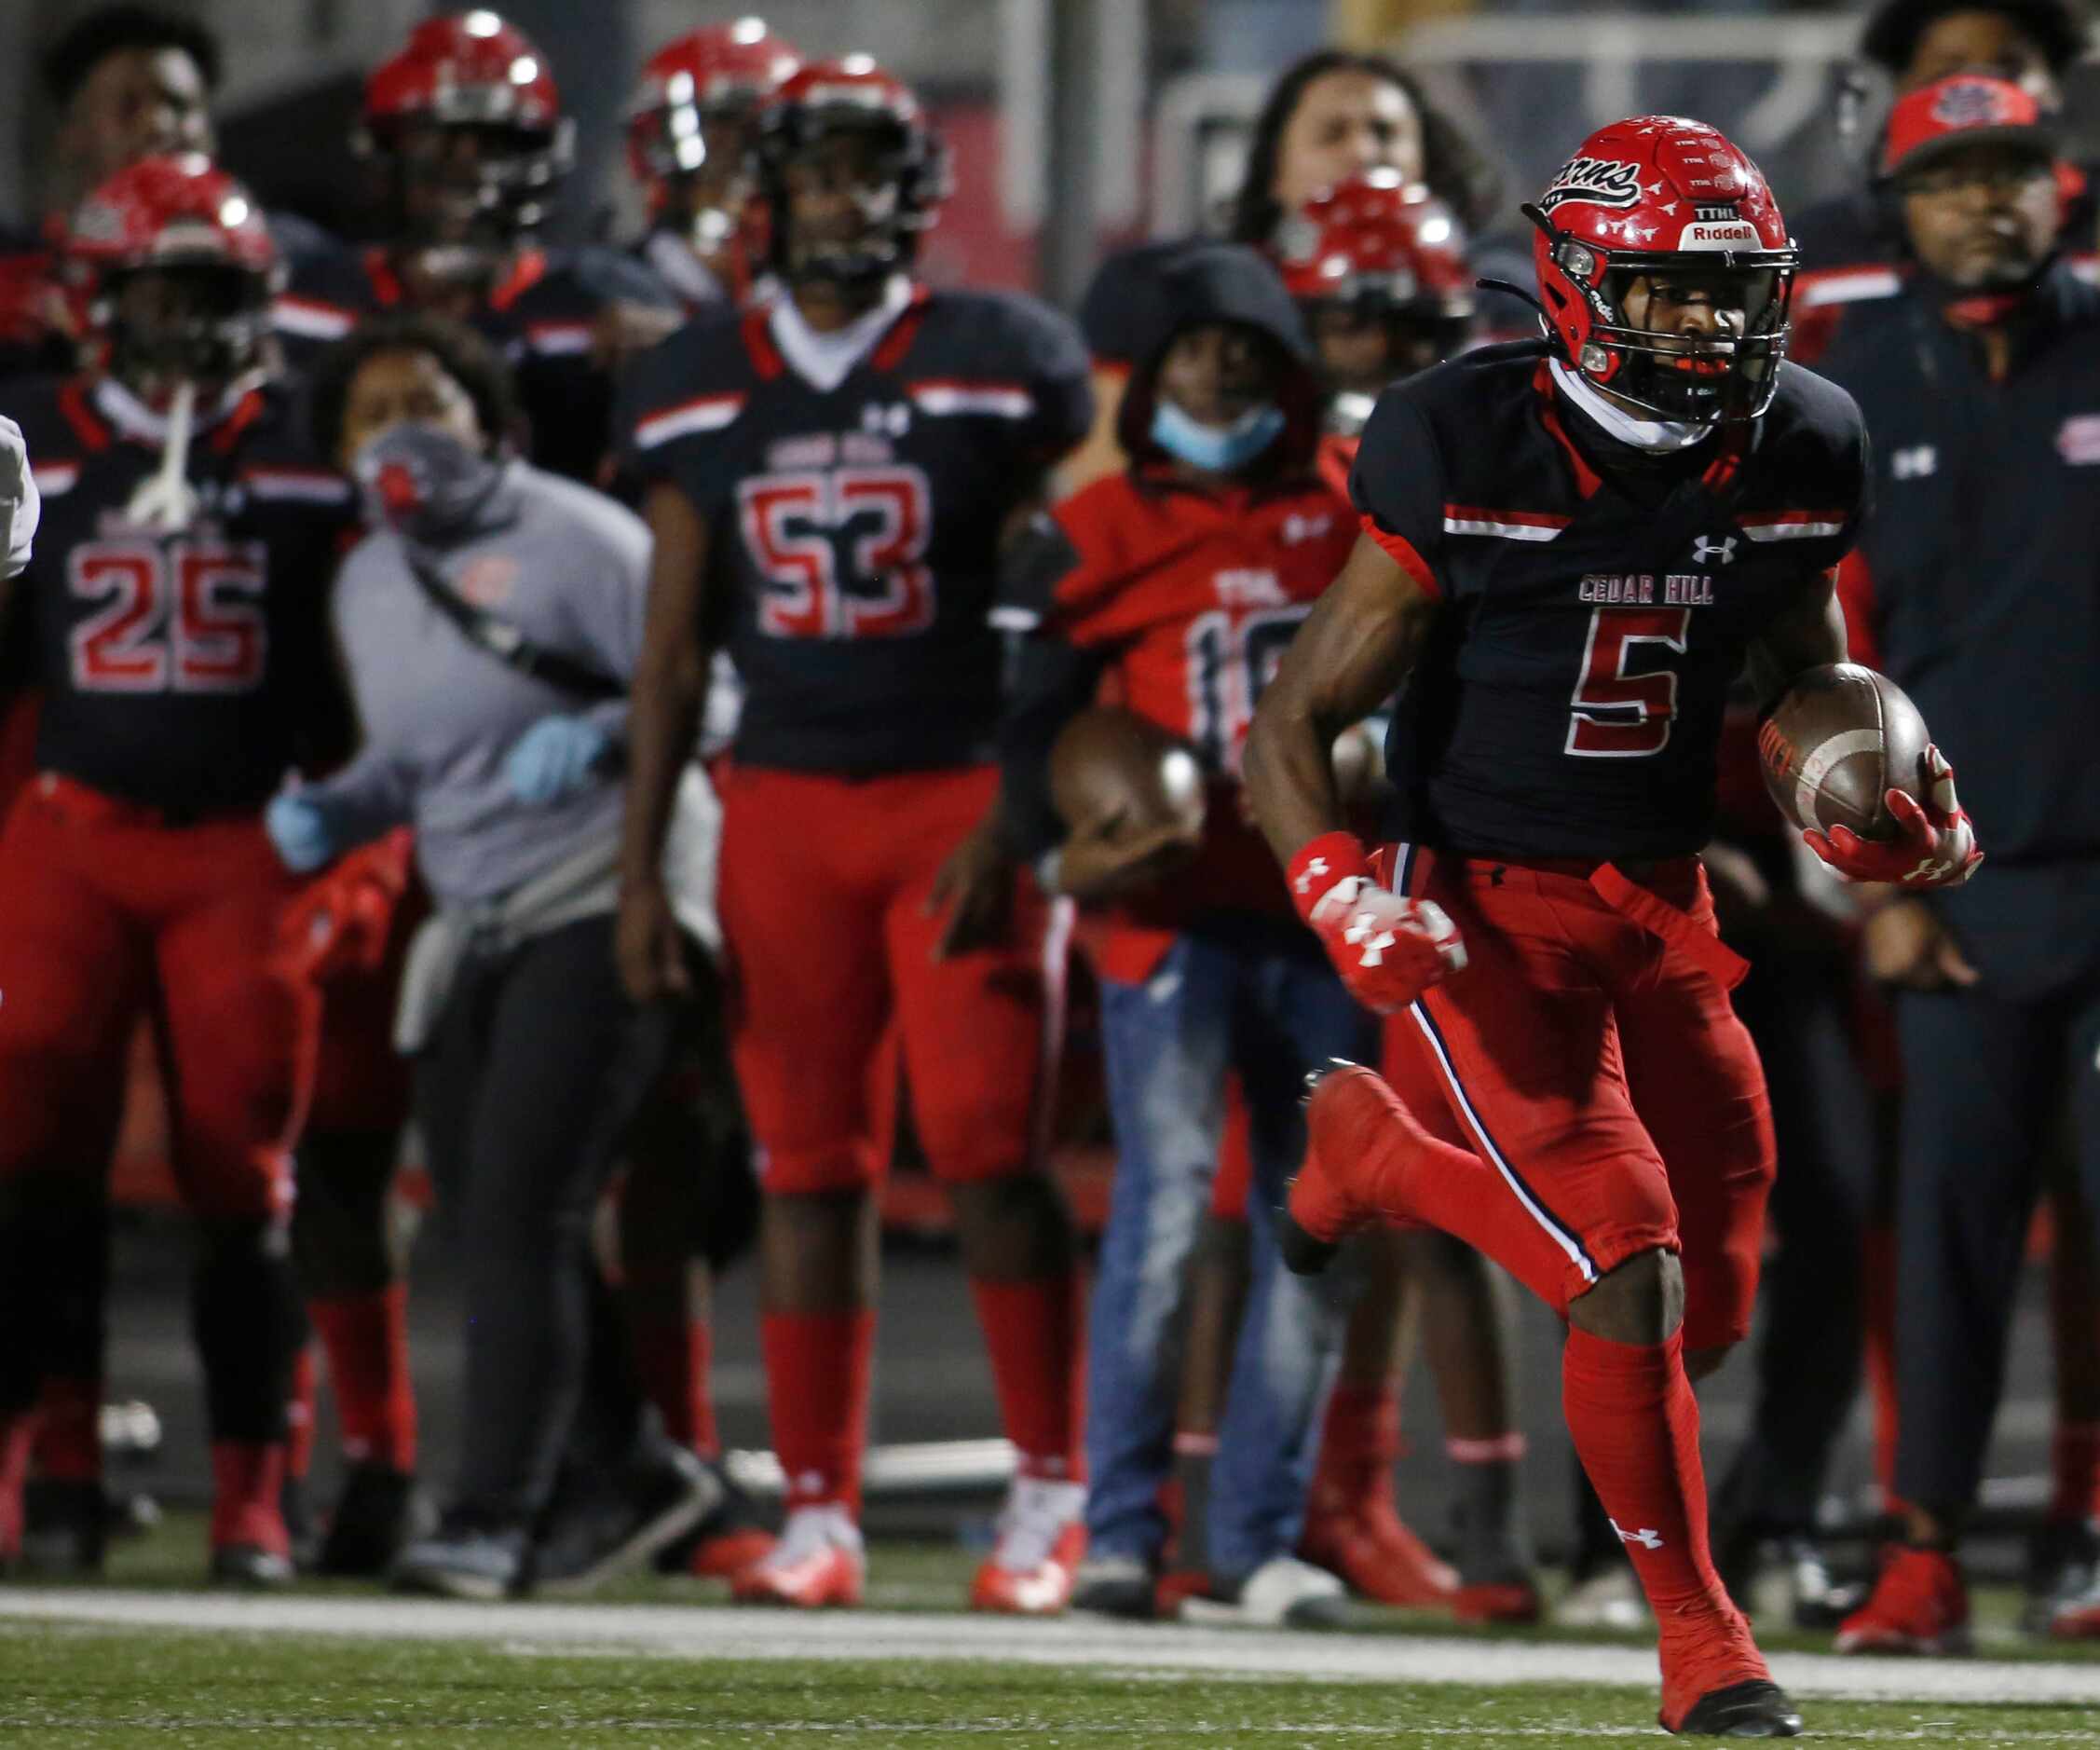 Cedar Hill running back Kevin Young,Jr. (5) scampers down the sideline for a receiving...